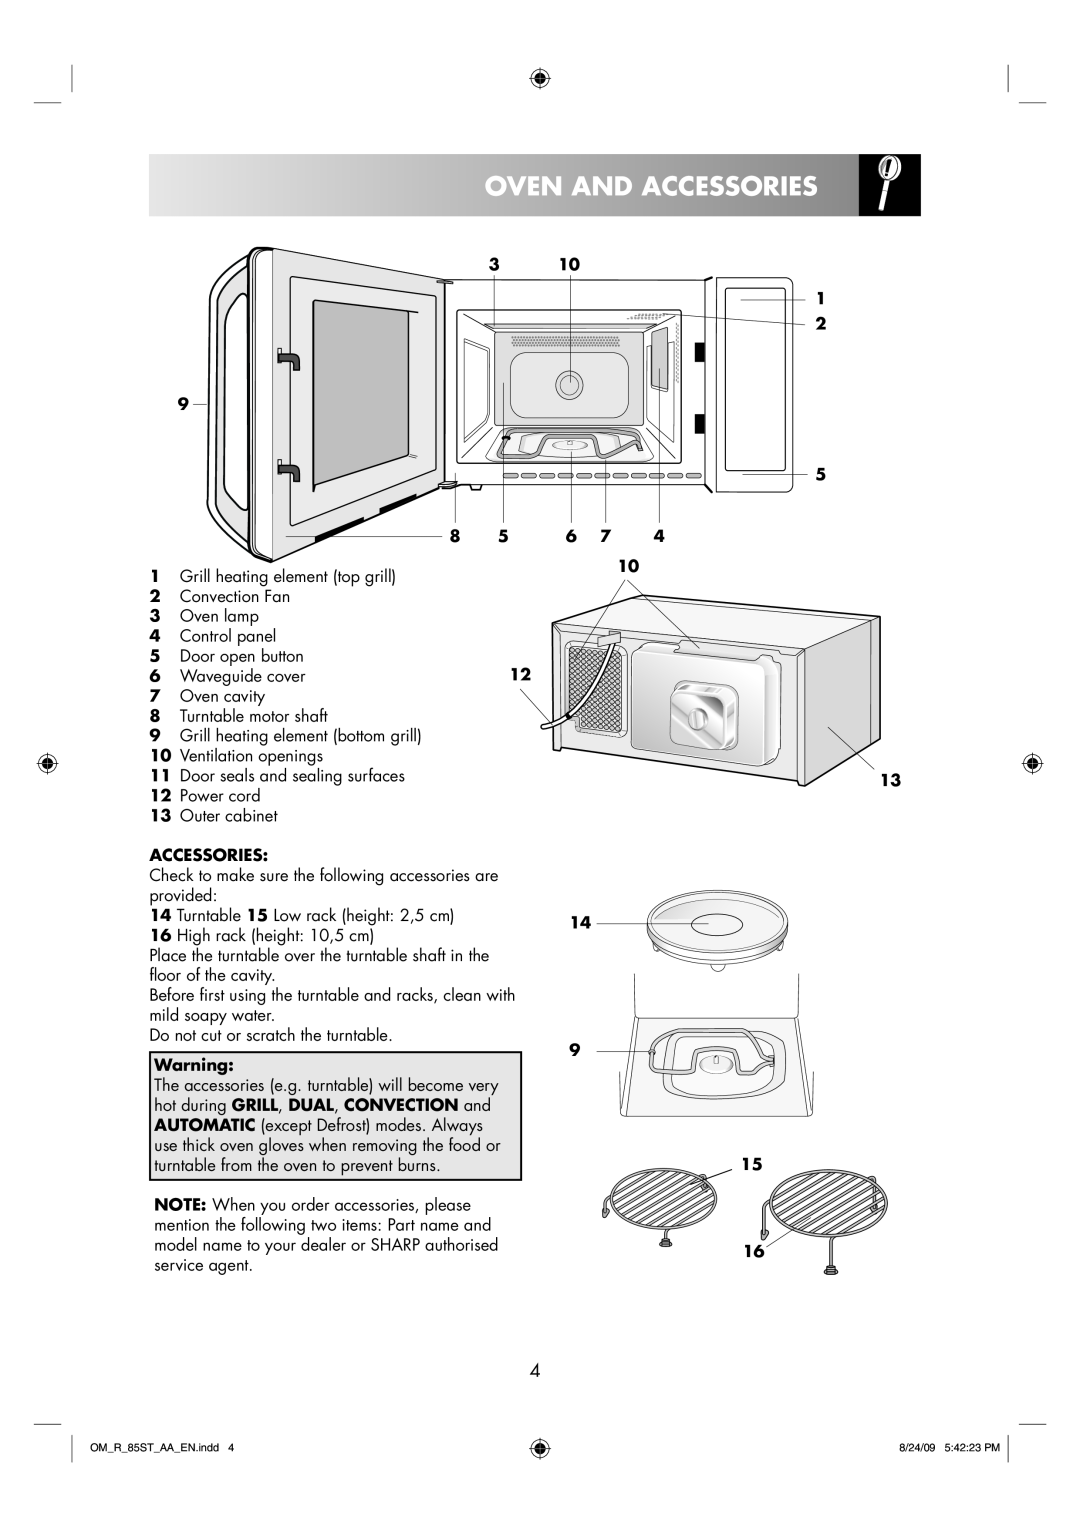 Sharp R-85ST-AA operation manual Oven And Accessories 